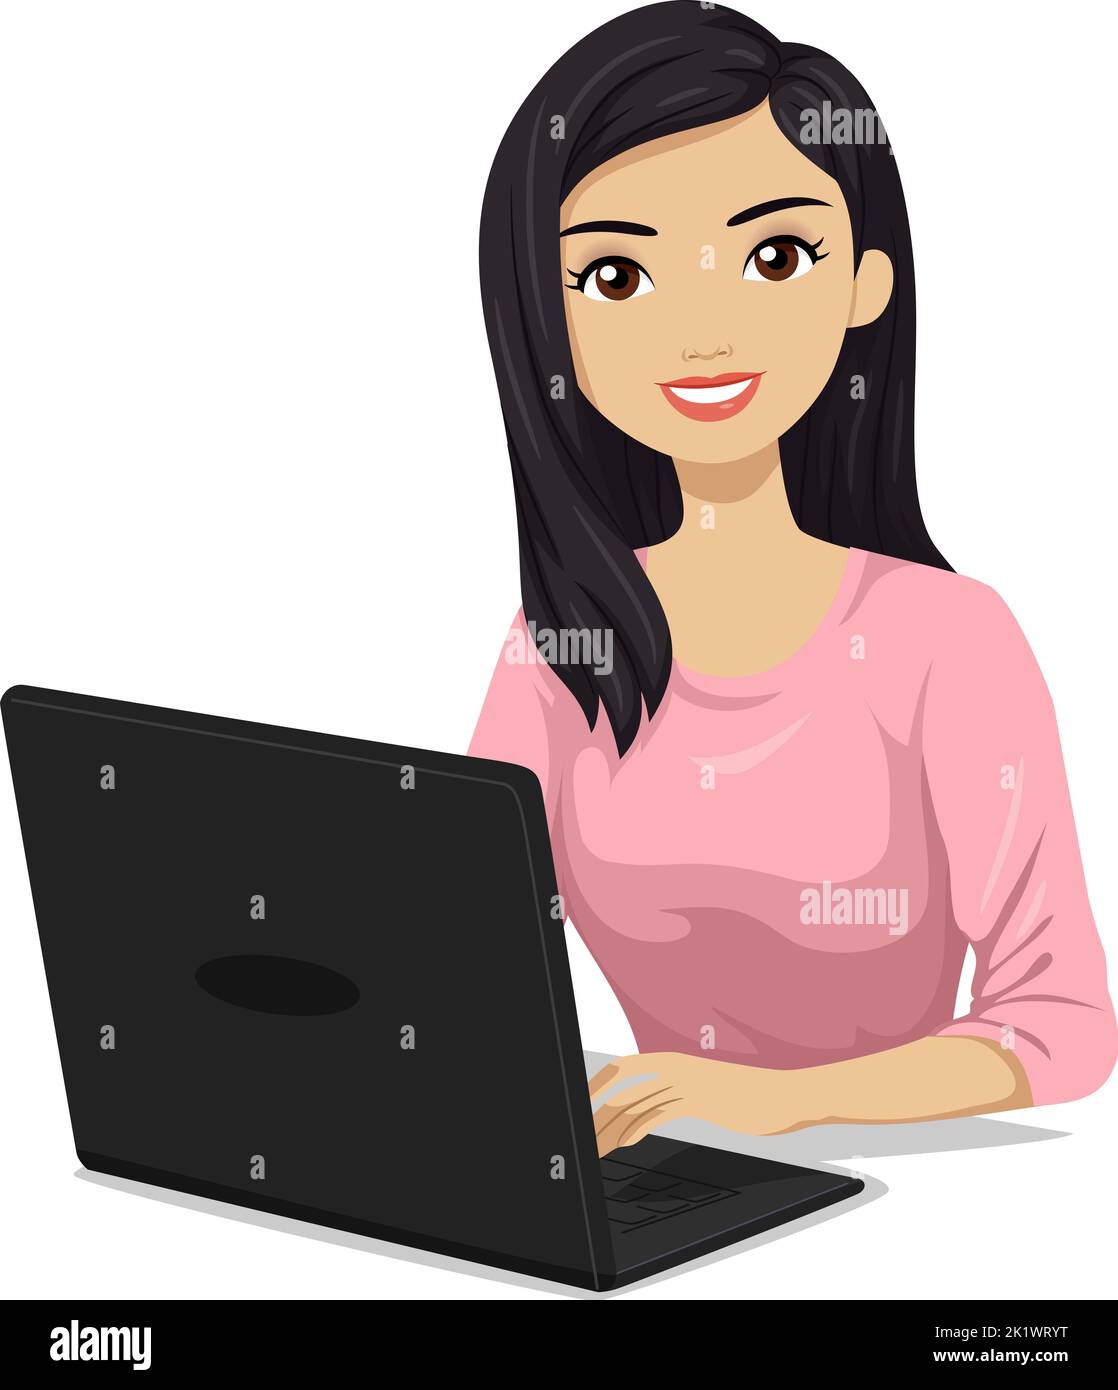 Illustration of South East Asian Teen Girl Student Using Laptop Stock Photo